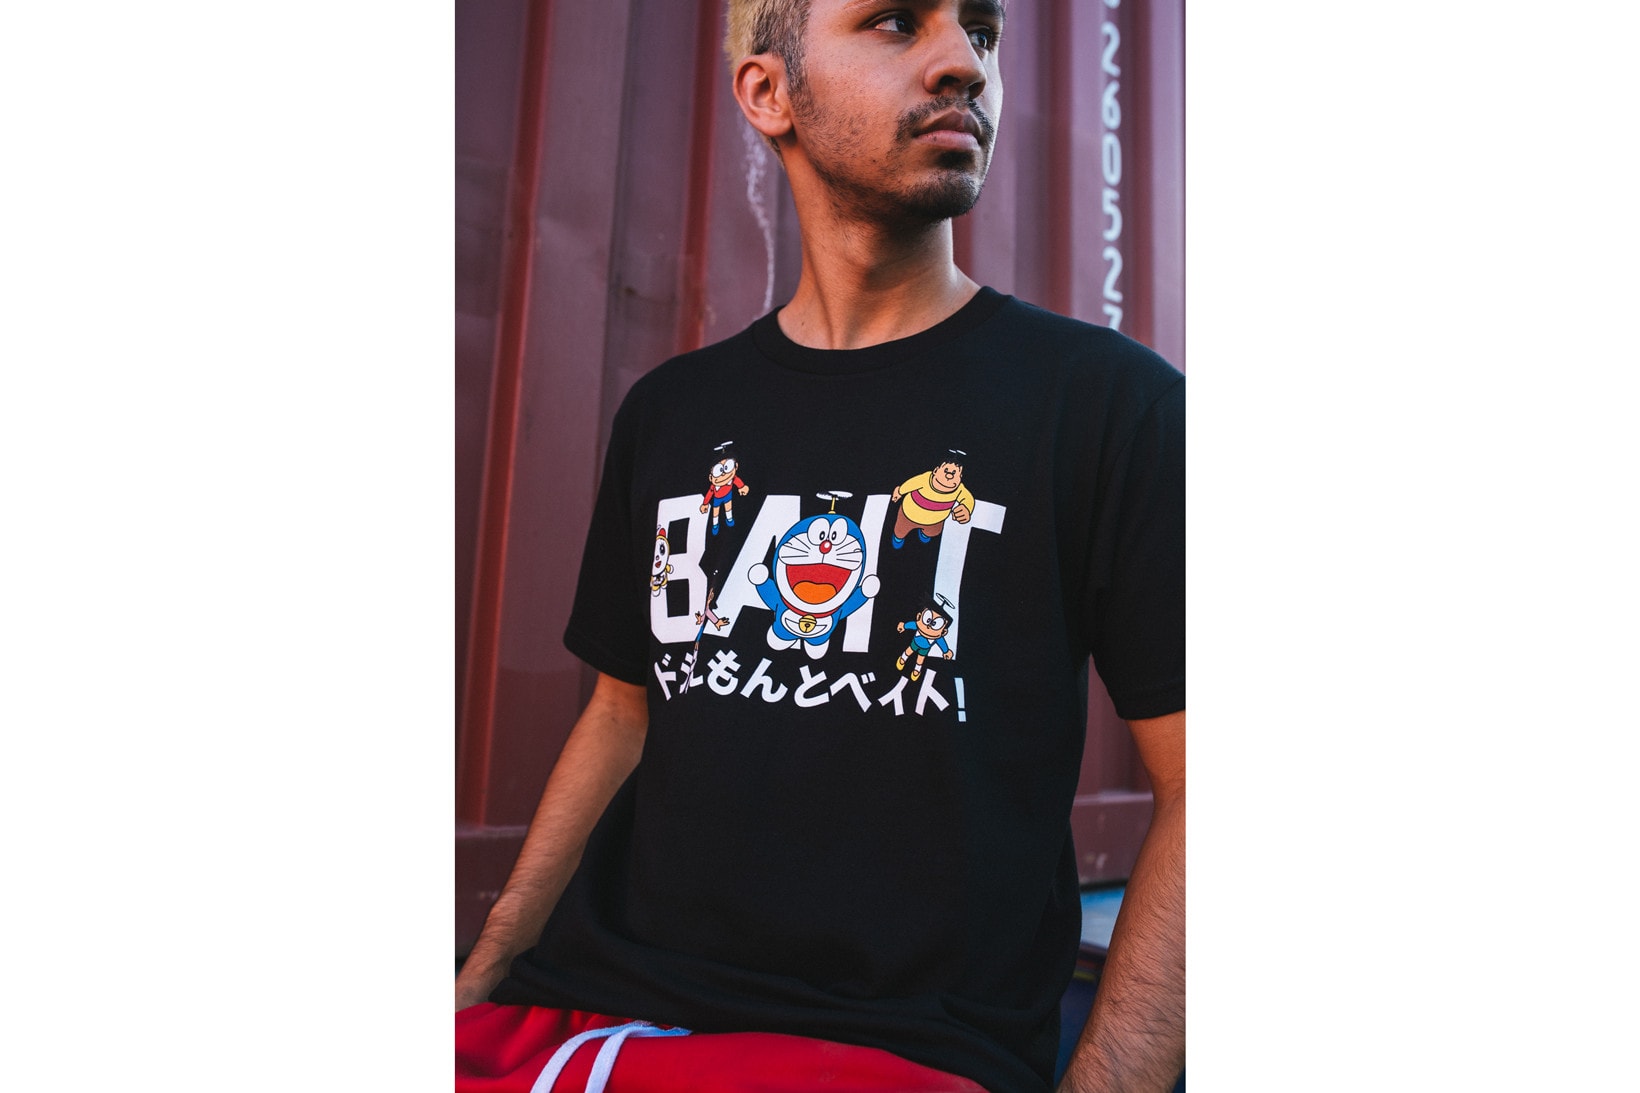 BAIT Doraemon capsule collection t shirts hoodies new september fall summer 2018 black blue white graphic